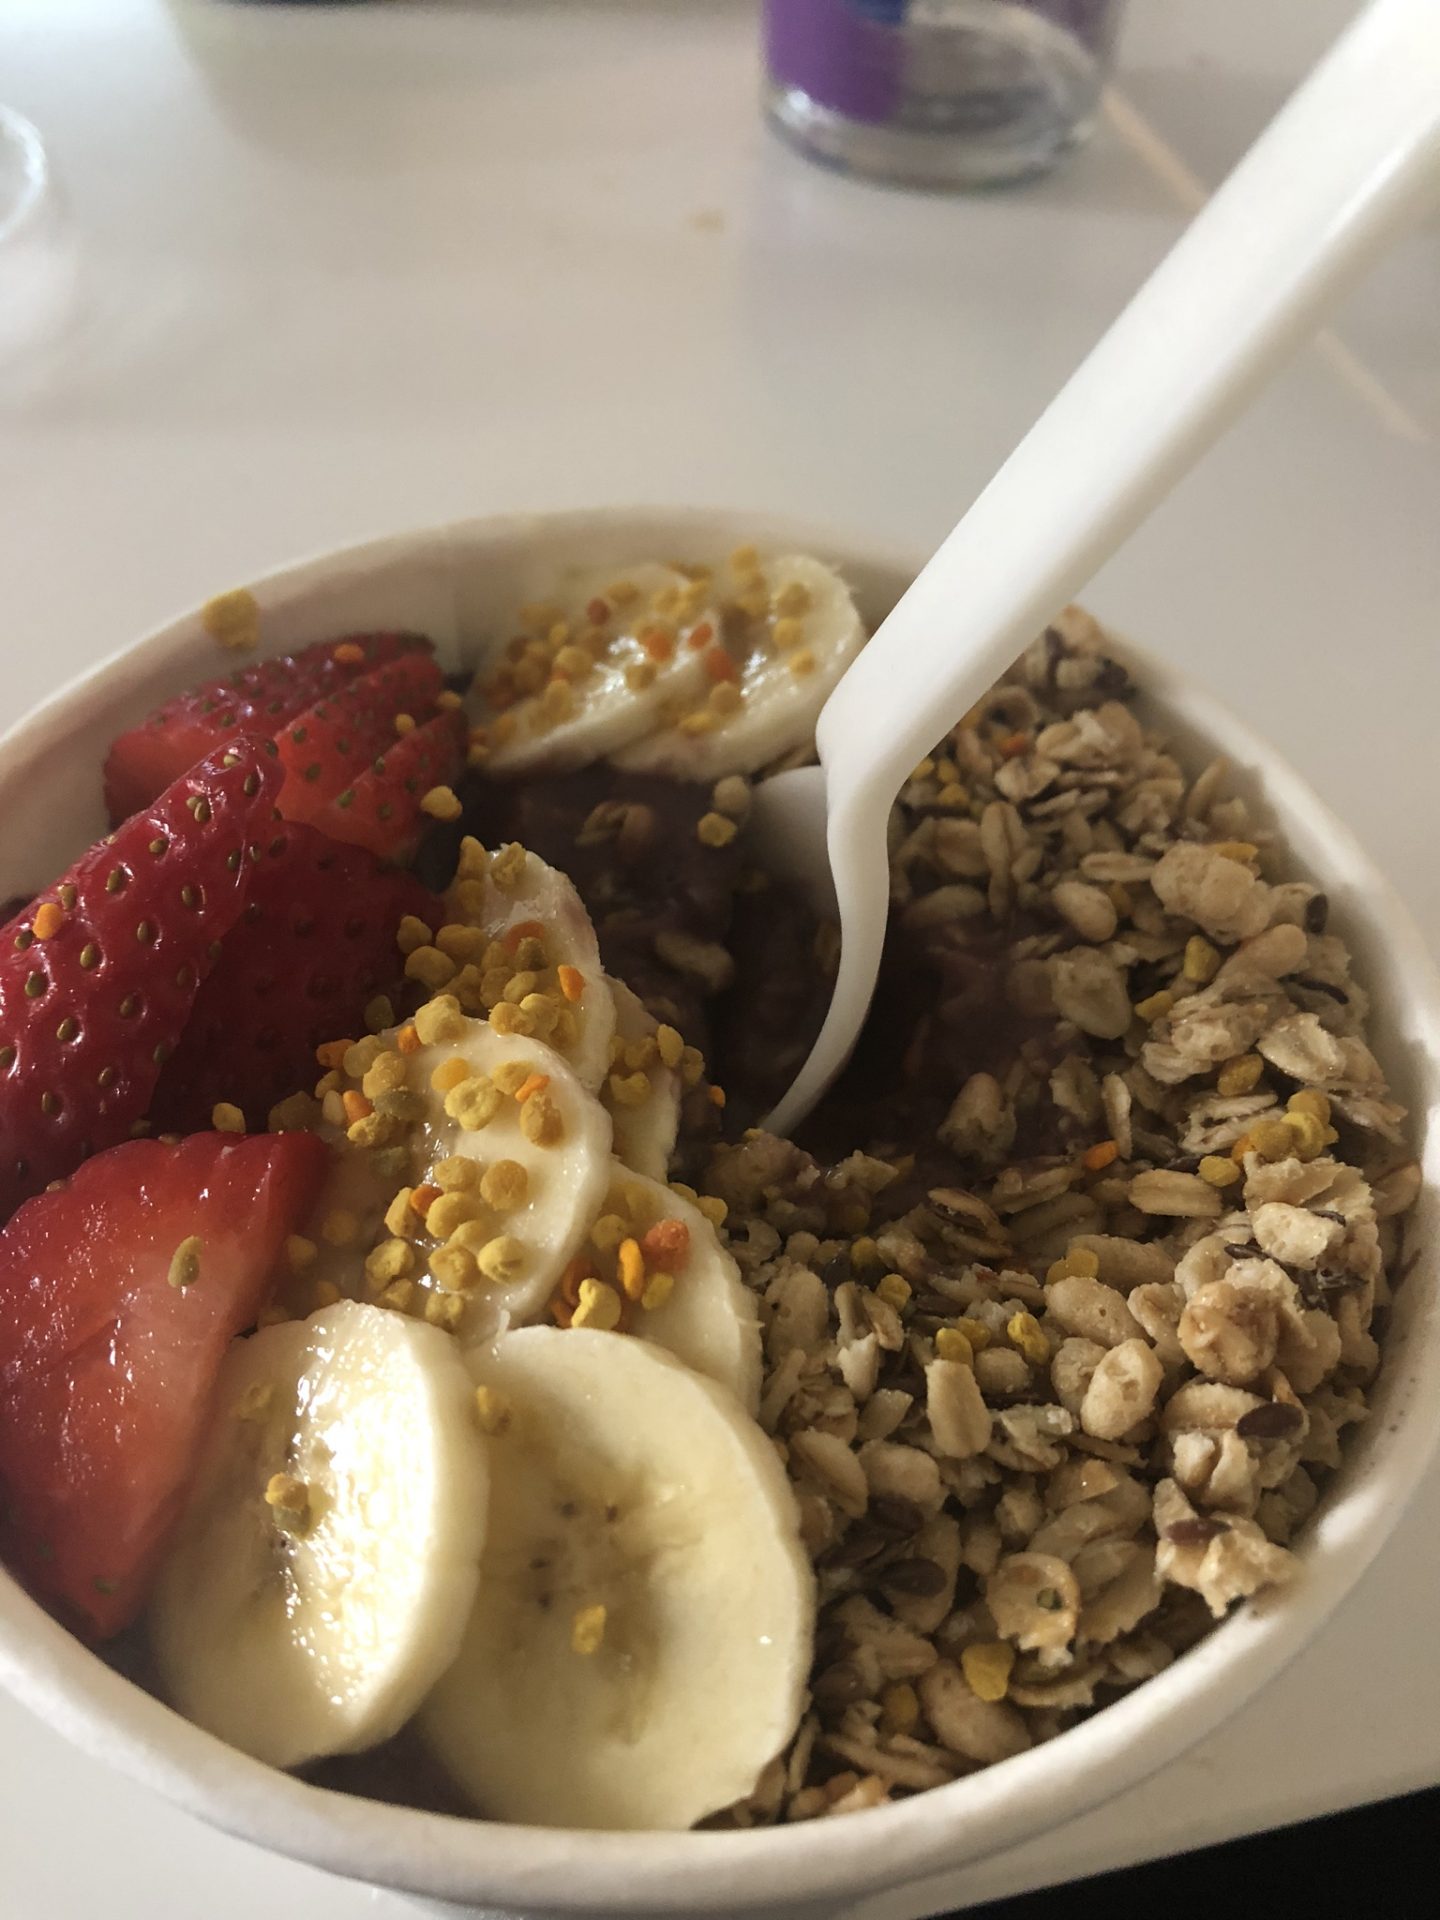 Best brunch in Vancouver: Acai bowl from Body Energy Club, Vancouver